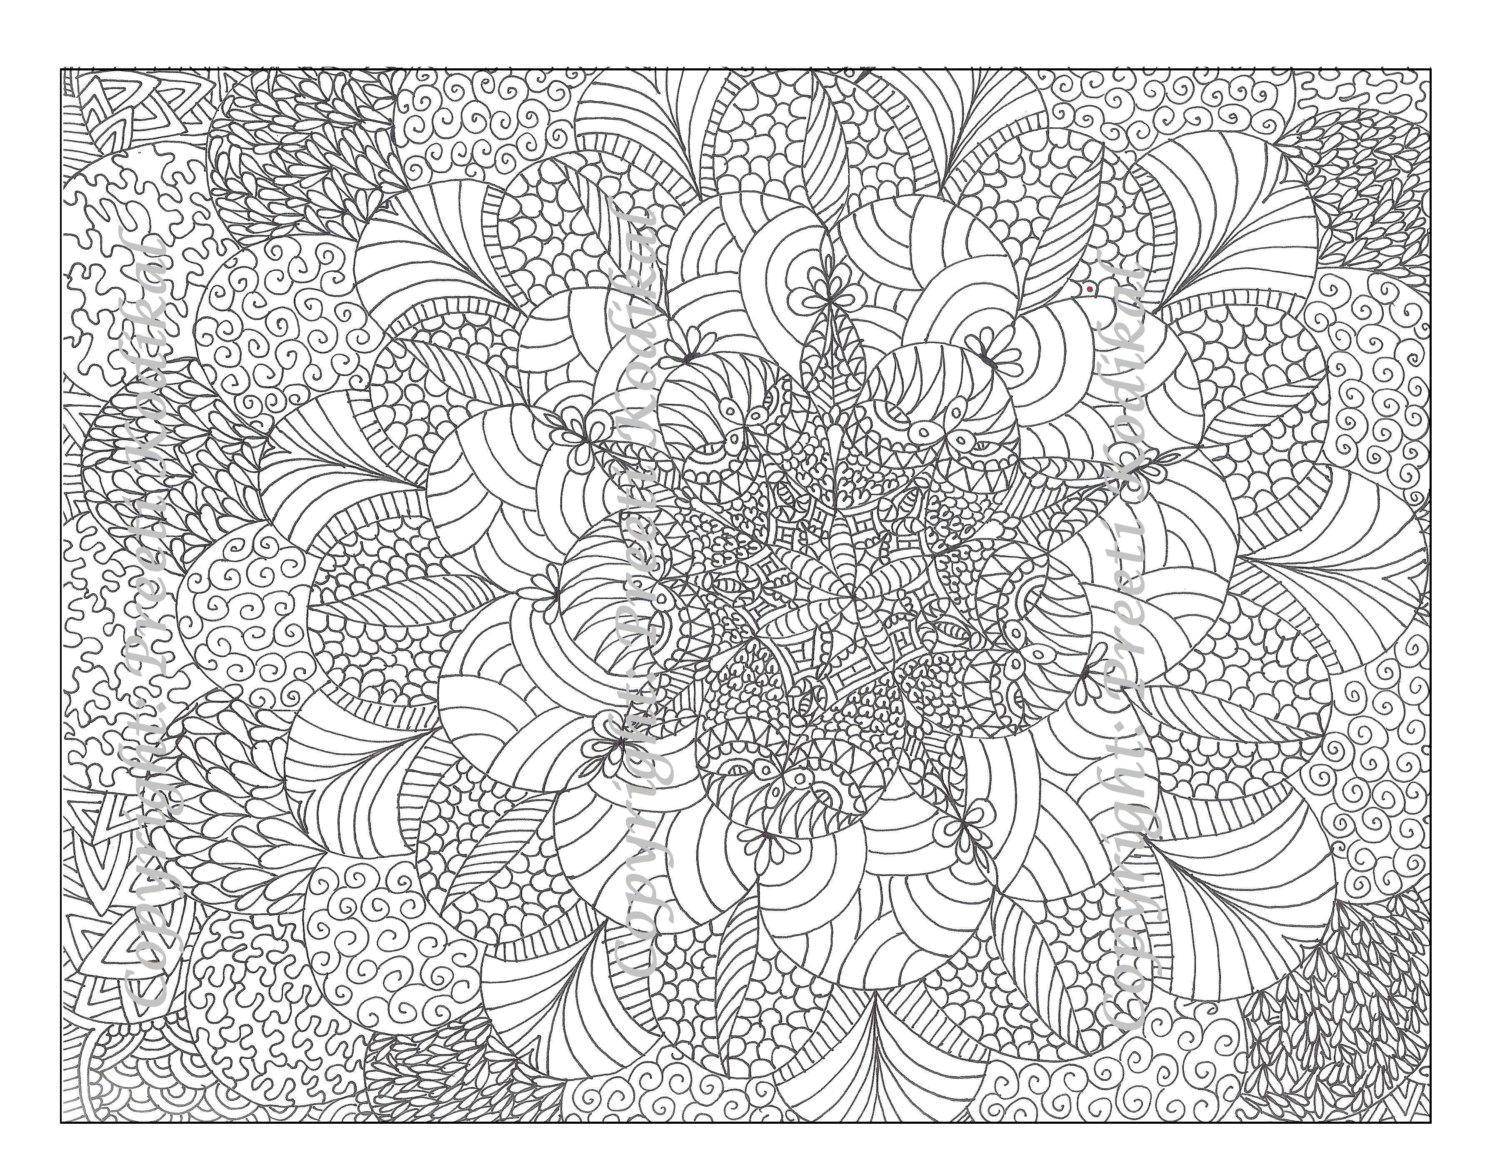 Coloring Very small patterns. Category coloring antistress. Tags:  patterns, flowers.